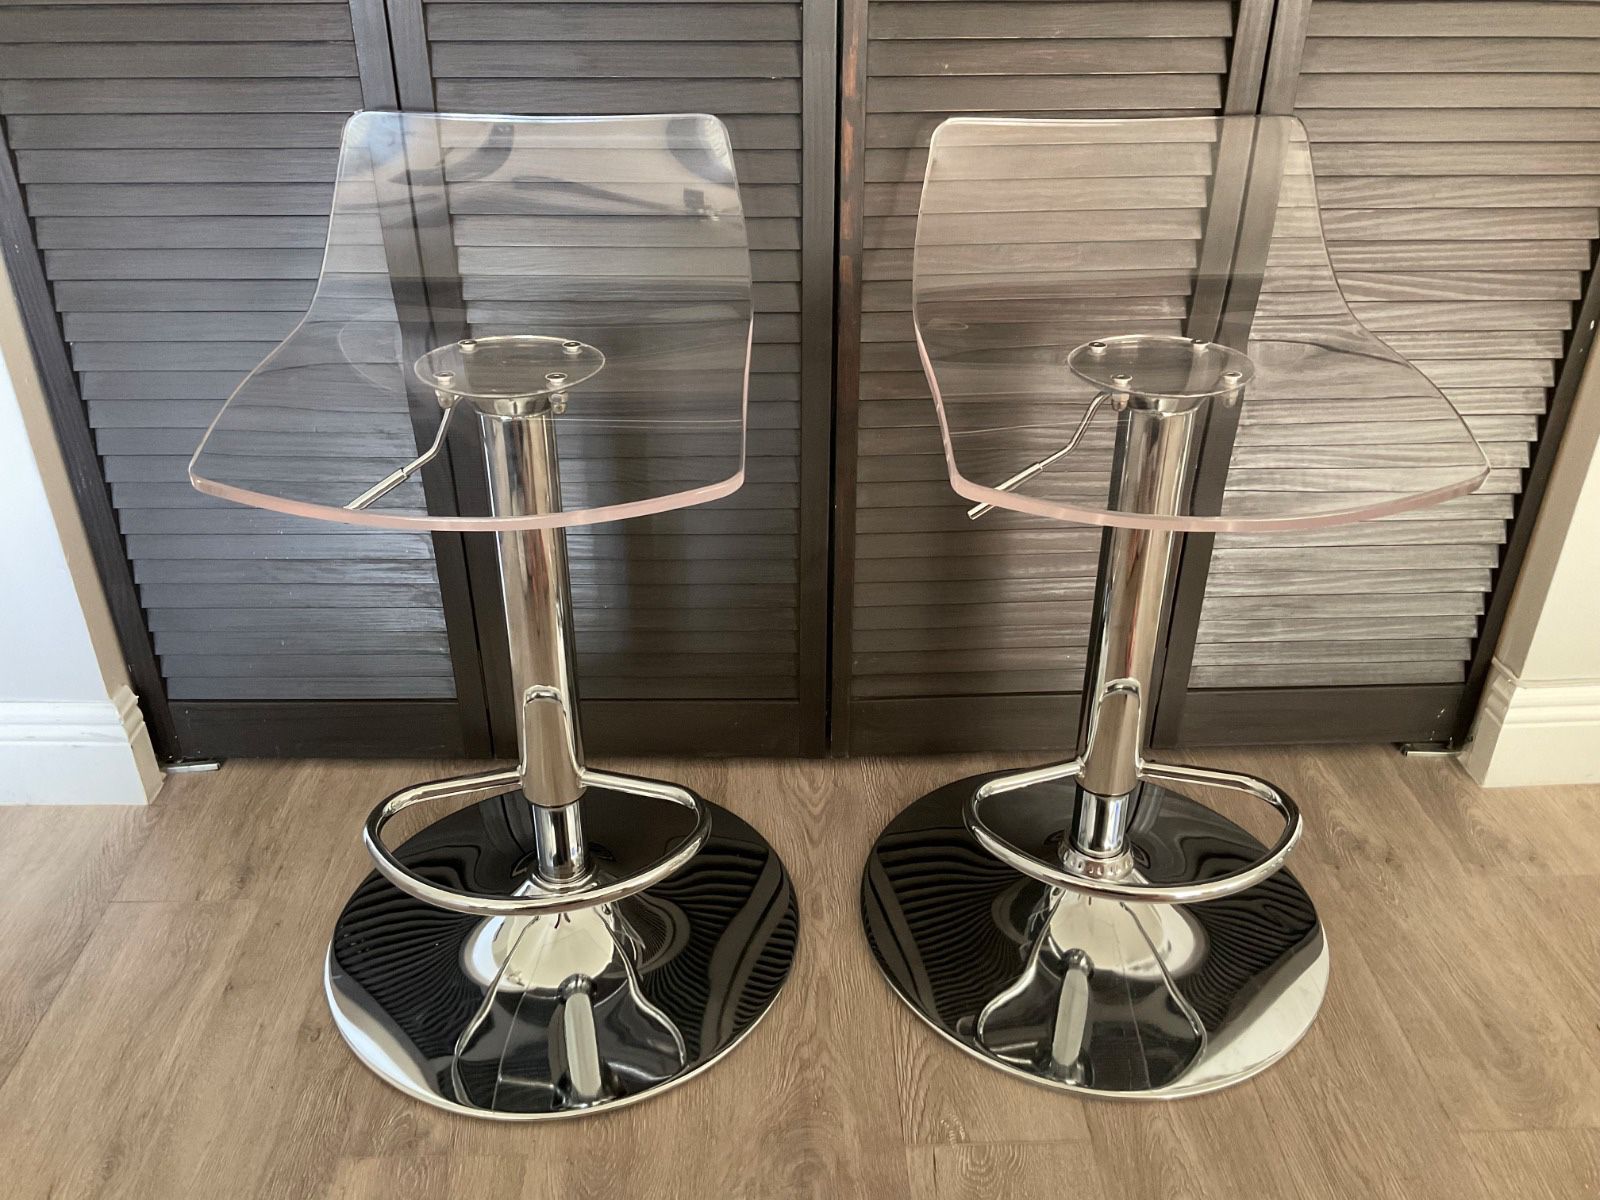 BRAND NEW!! Transparent / Clear Acrylic /Chrome Ghost Low Back Swivel Barstools ARE BACK!!!  $$85